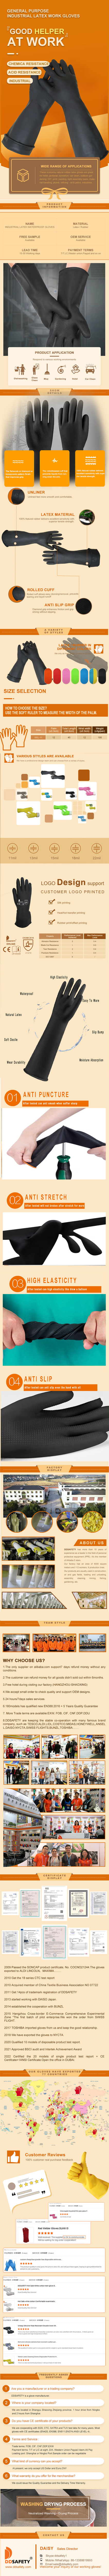 18 Inch Long Black Heavy Duty Rubber Latex Industrial Gloves - DHL545 Chemical Resistant Latex Gloves, 18'' Industrial Heavy Duty Work Rubber Glove, Black Color One Pair- DHL545 Chemical Resistant Latex Gloves,Industrial Heavy Duty Work Rubber Glove,Work Rubber Glove